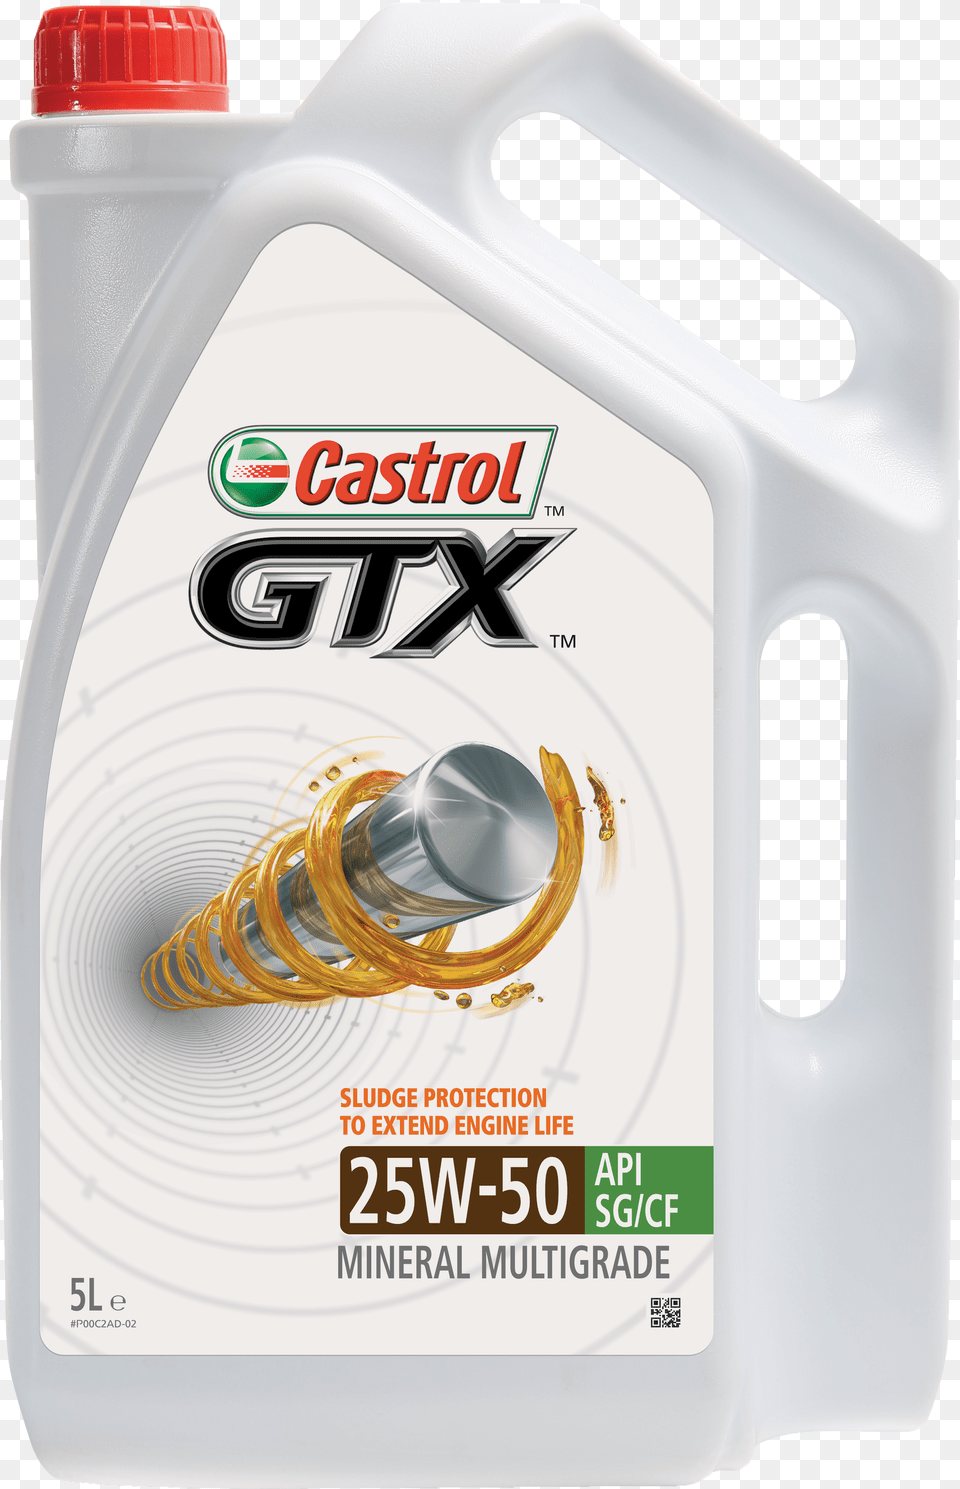 Castrol Gtx 25w 50 Hornet, Cushion, Furniture, Home Decor, Couch Free Transparent Png